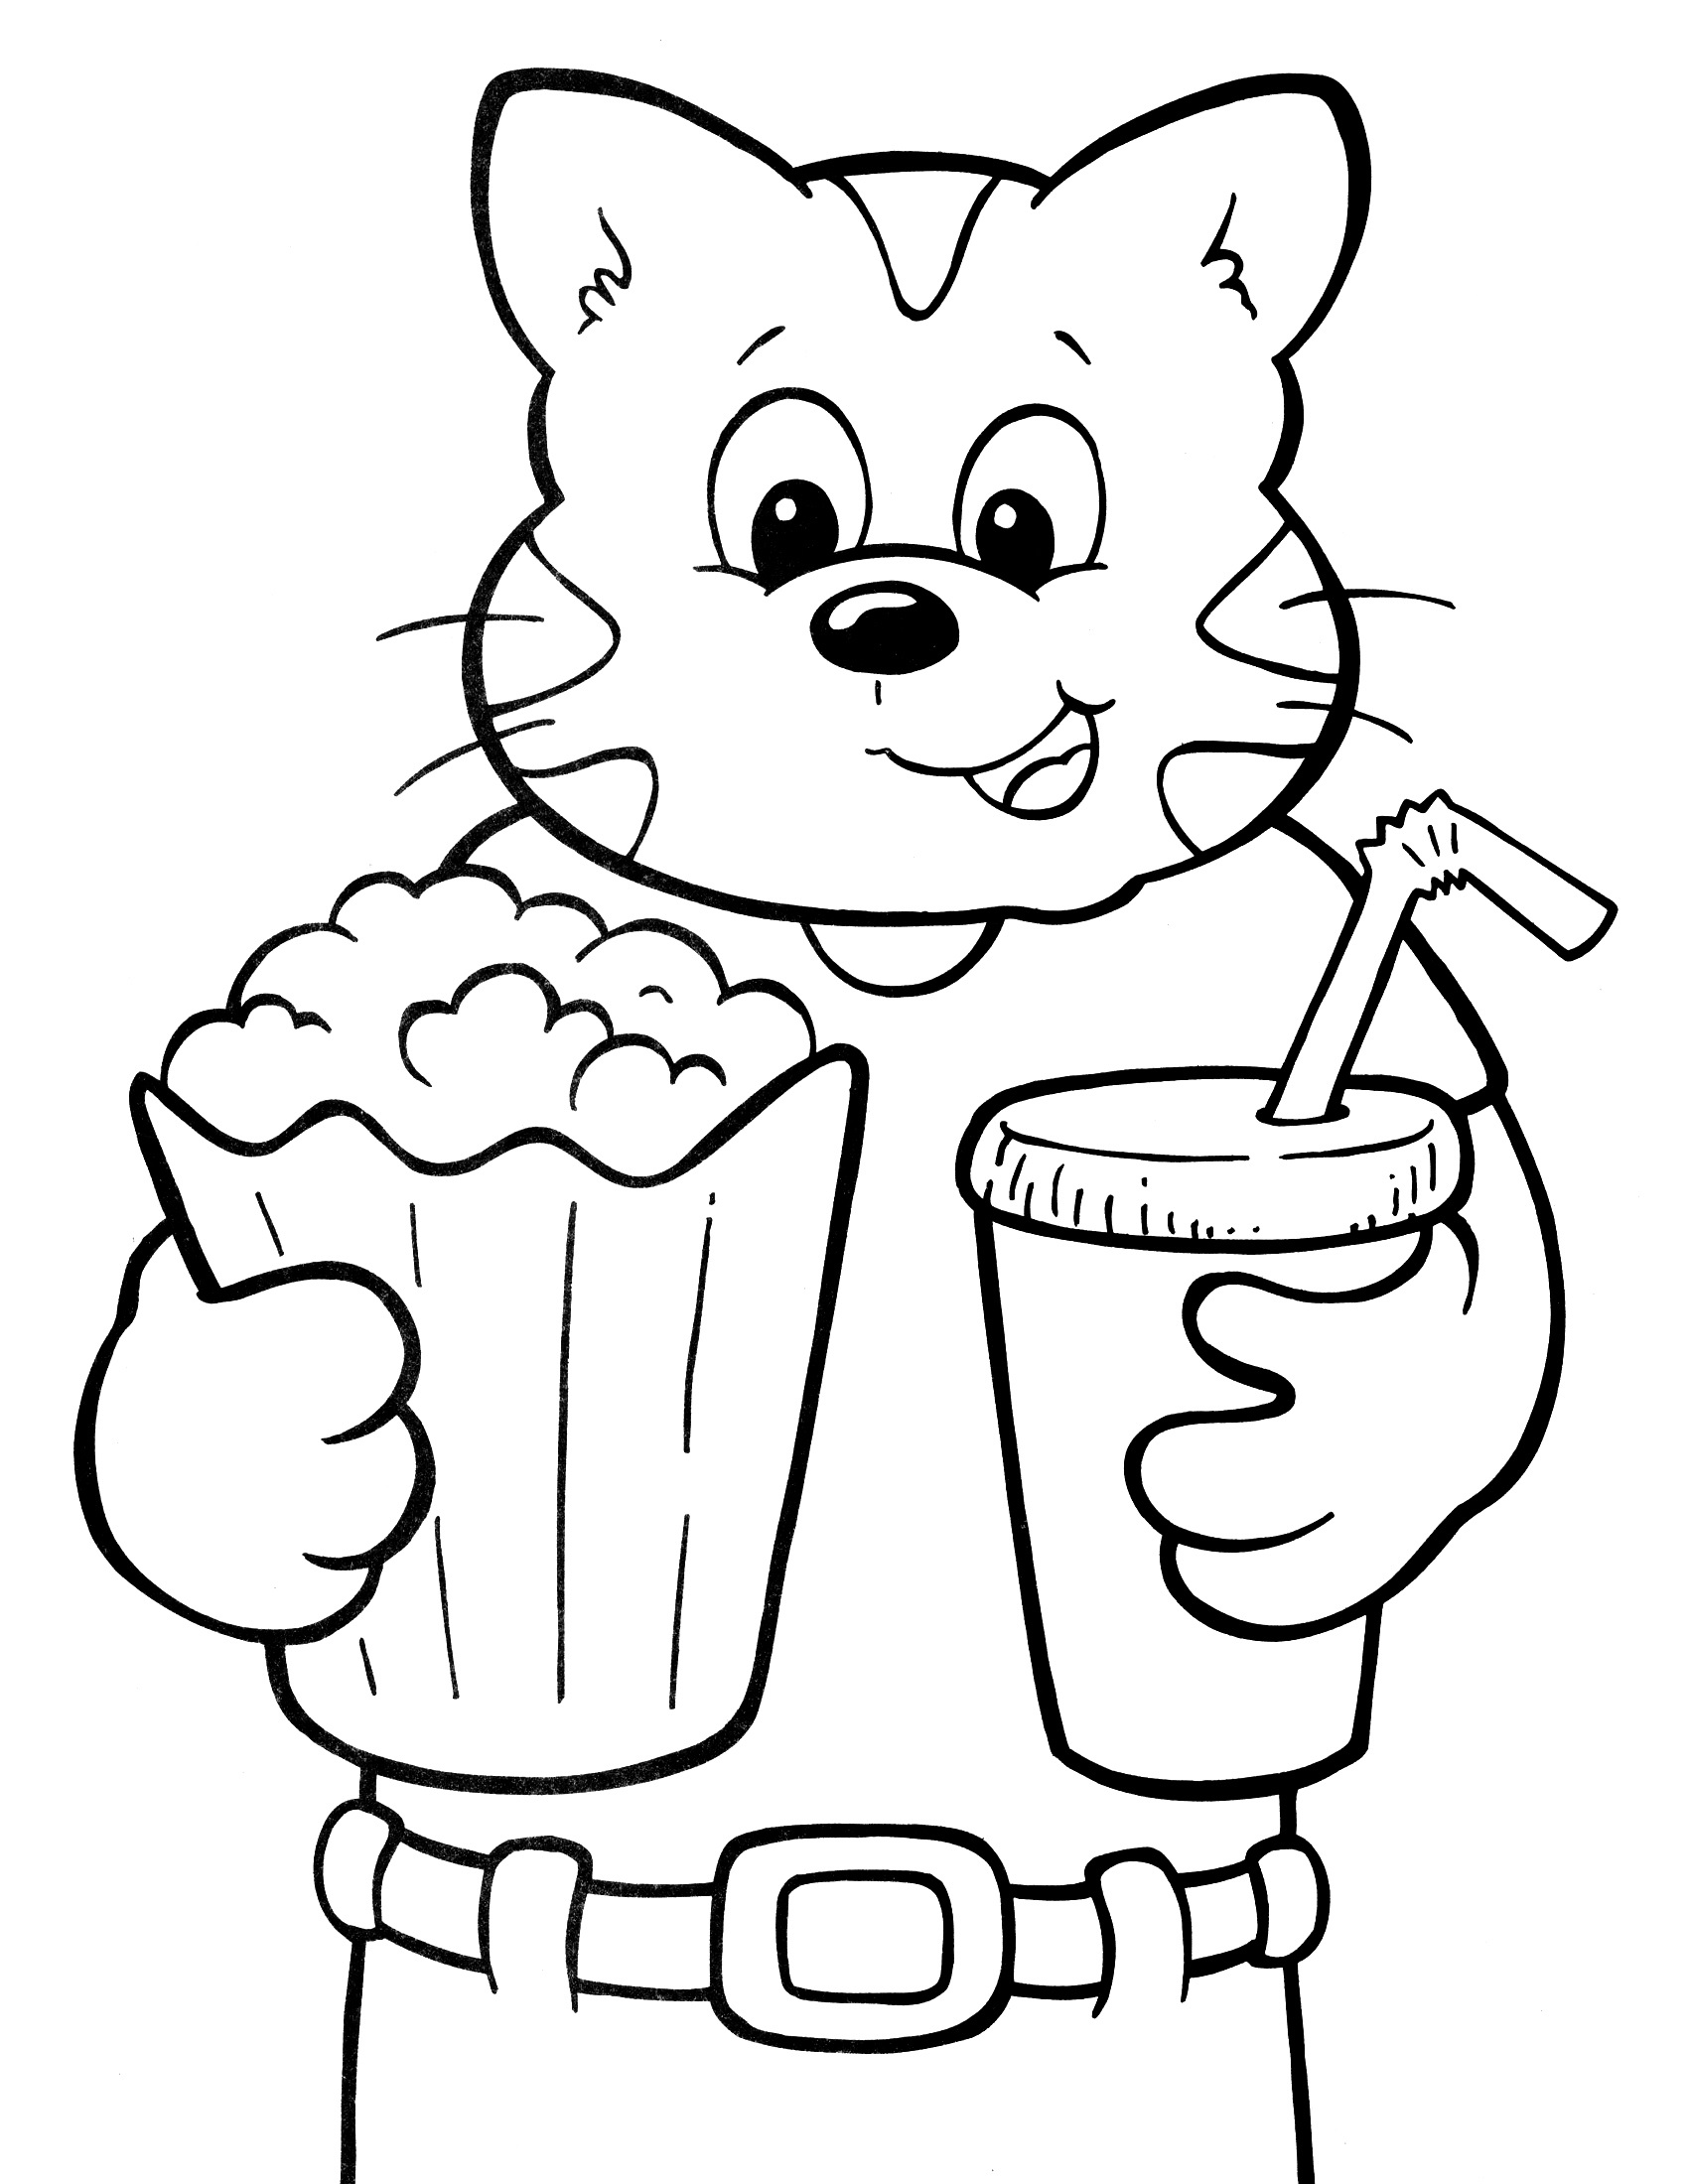 Crayola Coloring Pages for Kids